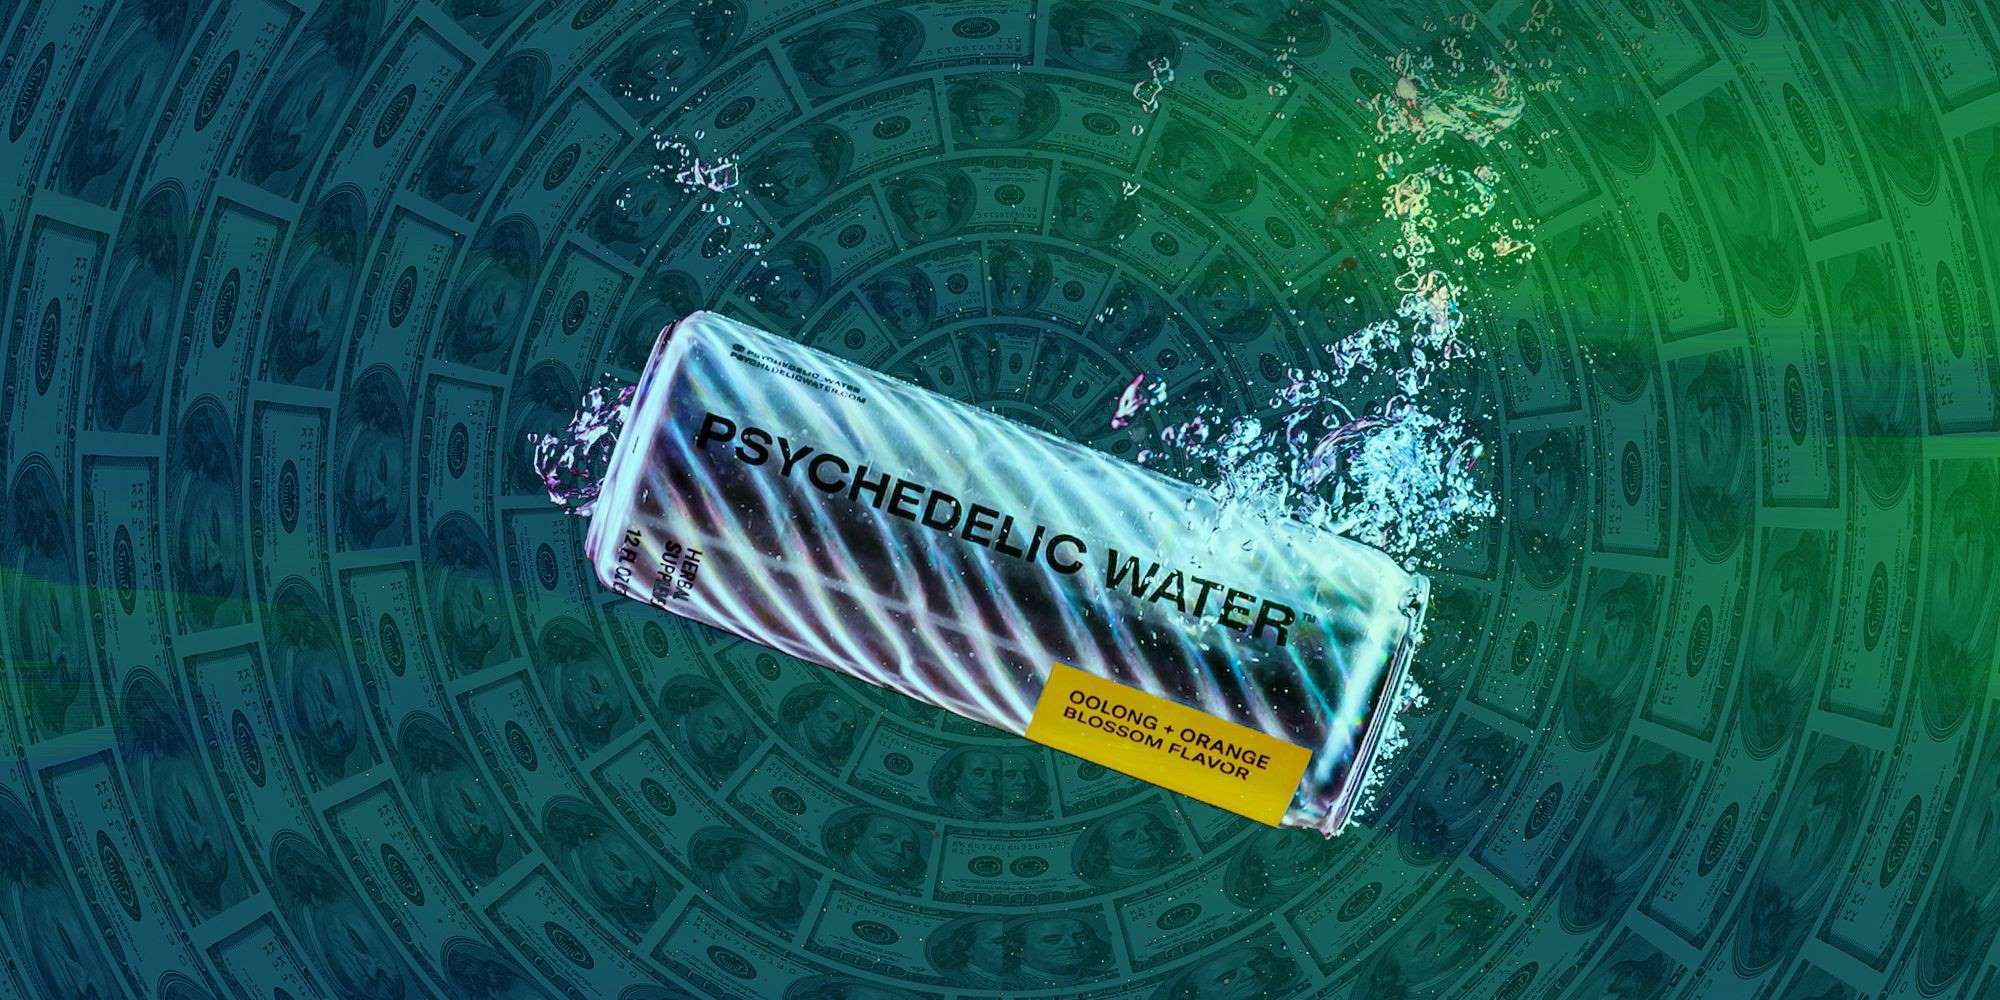 14-captivating-facts-about-psychedelic-water